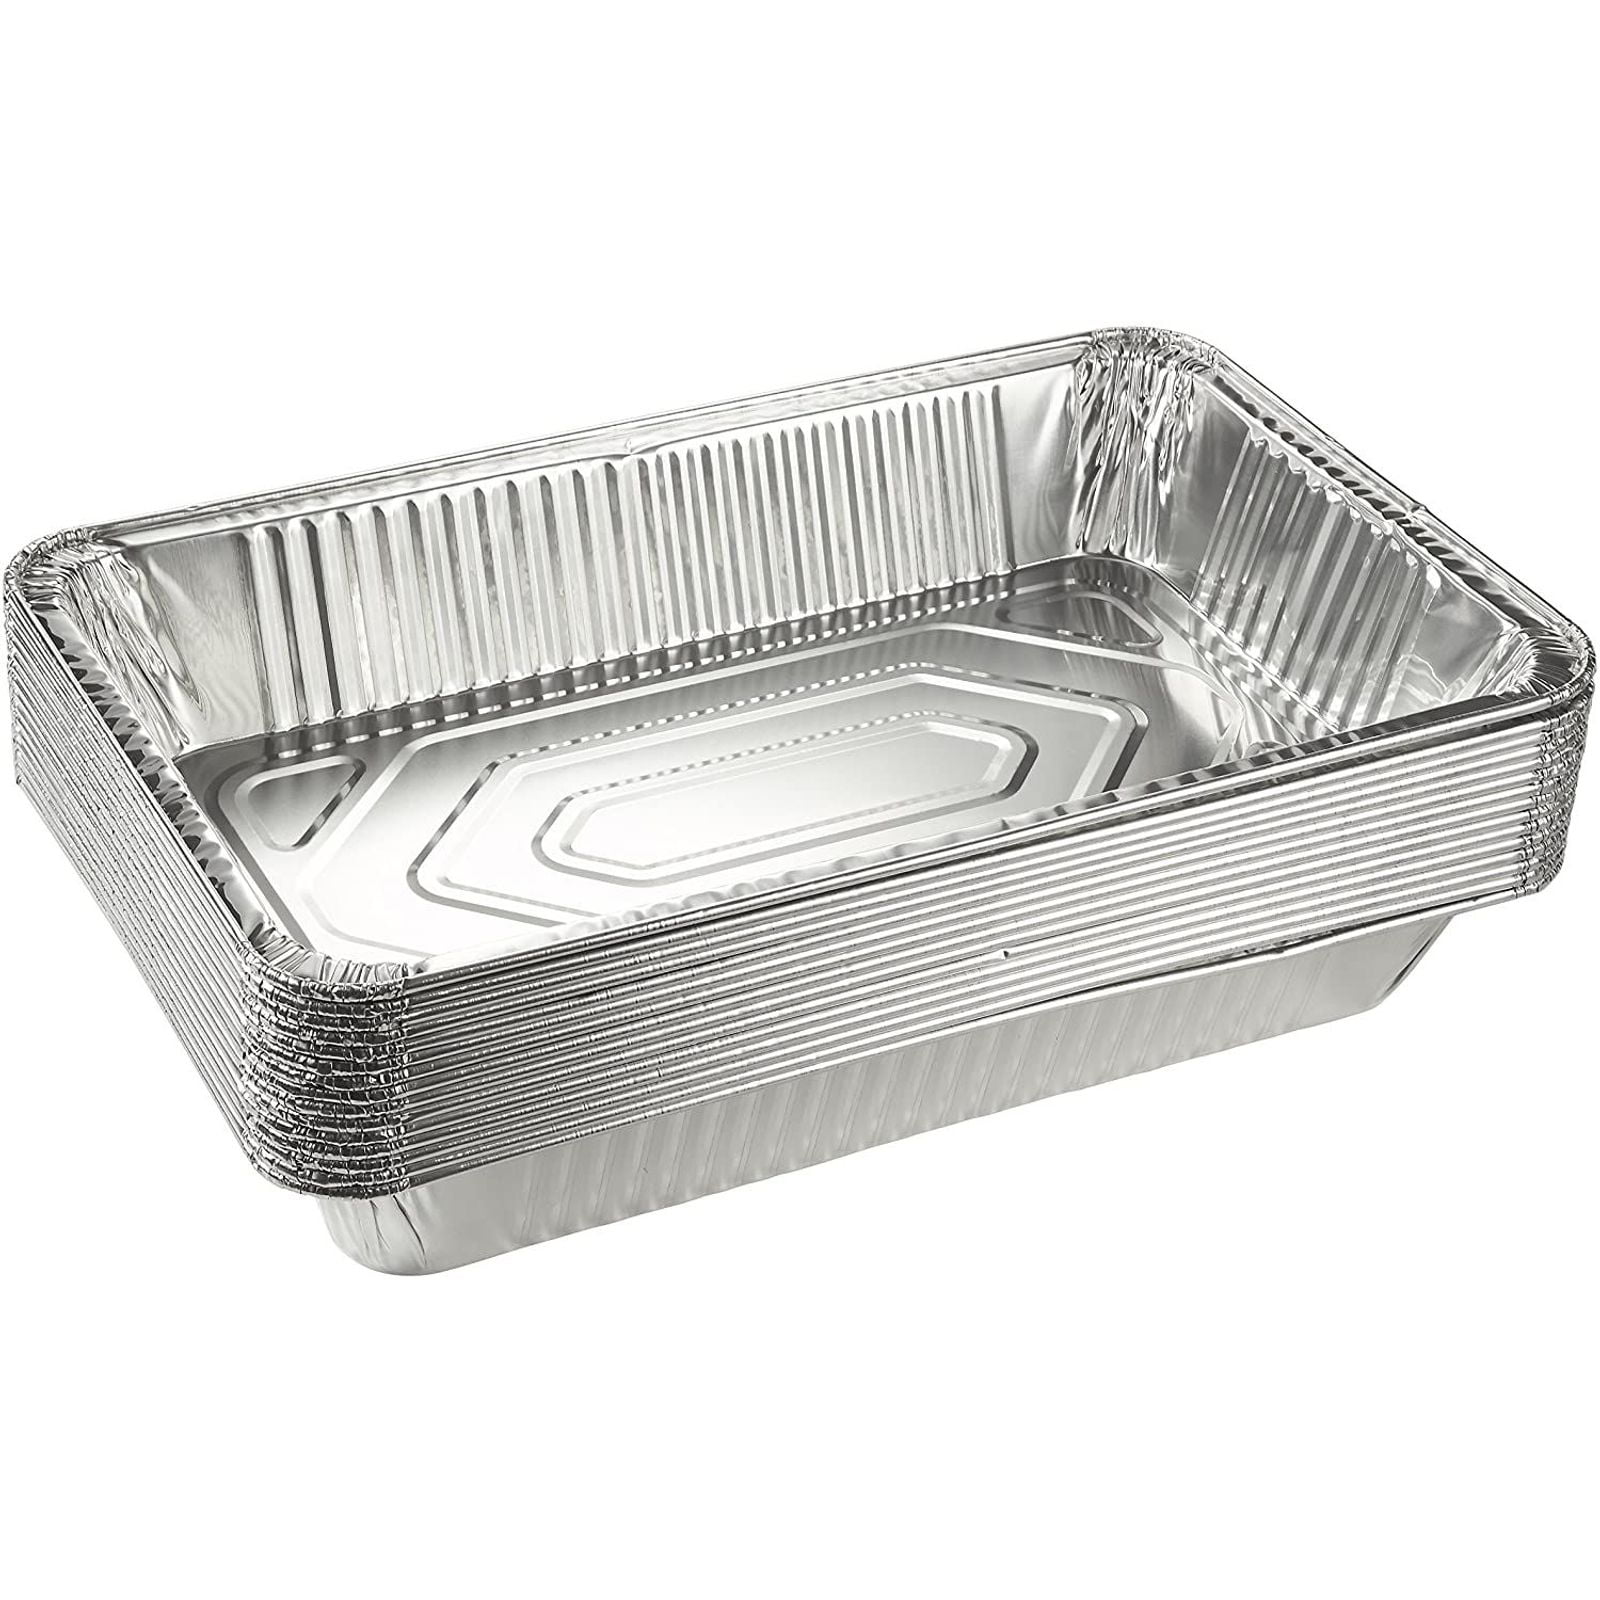 Disposable Party Trays Full-Size Medium Steam Table Aluminum Foil Pan 50 Pack 